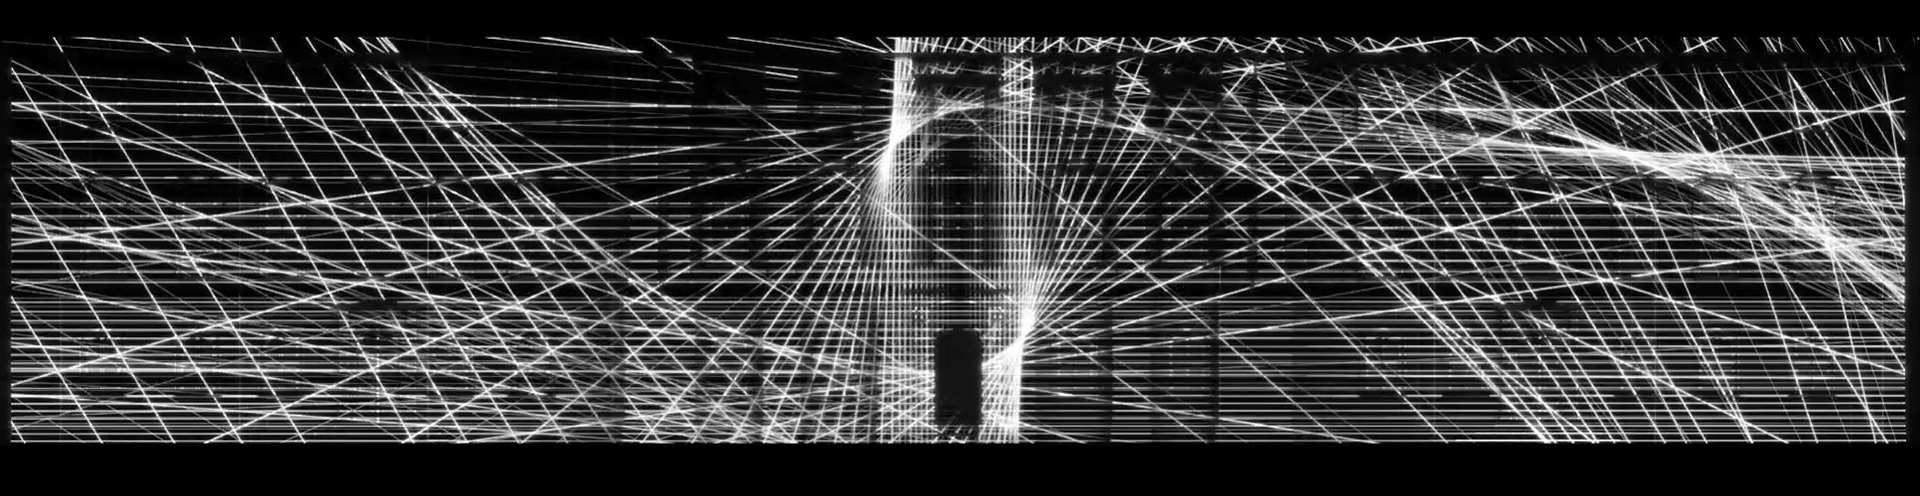 Under an Alias / Audiovisual Video Mapping